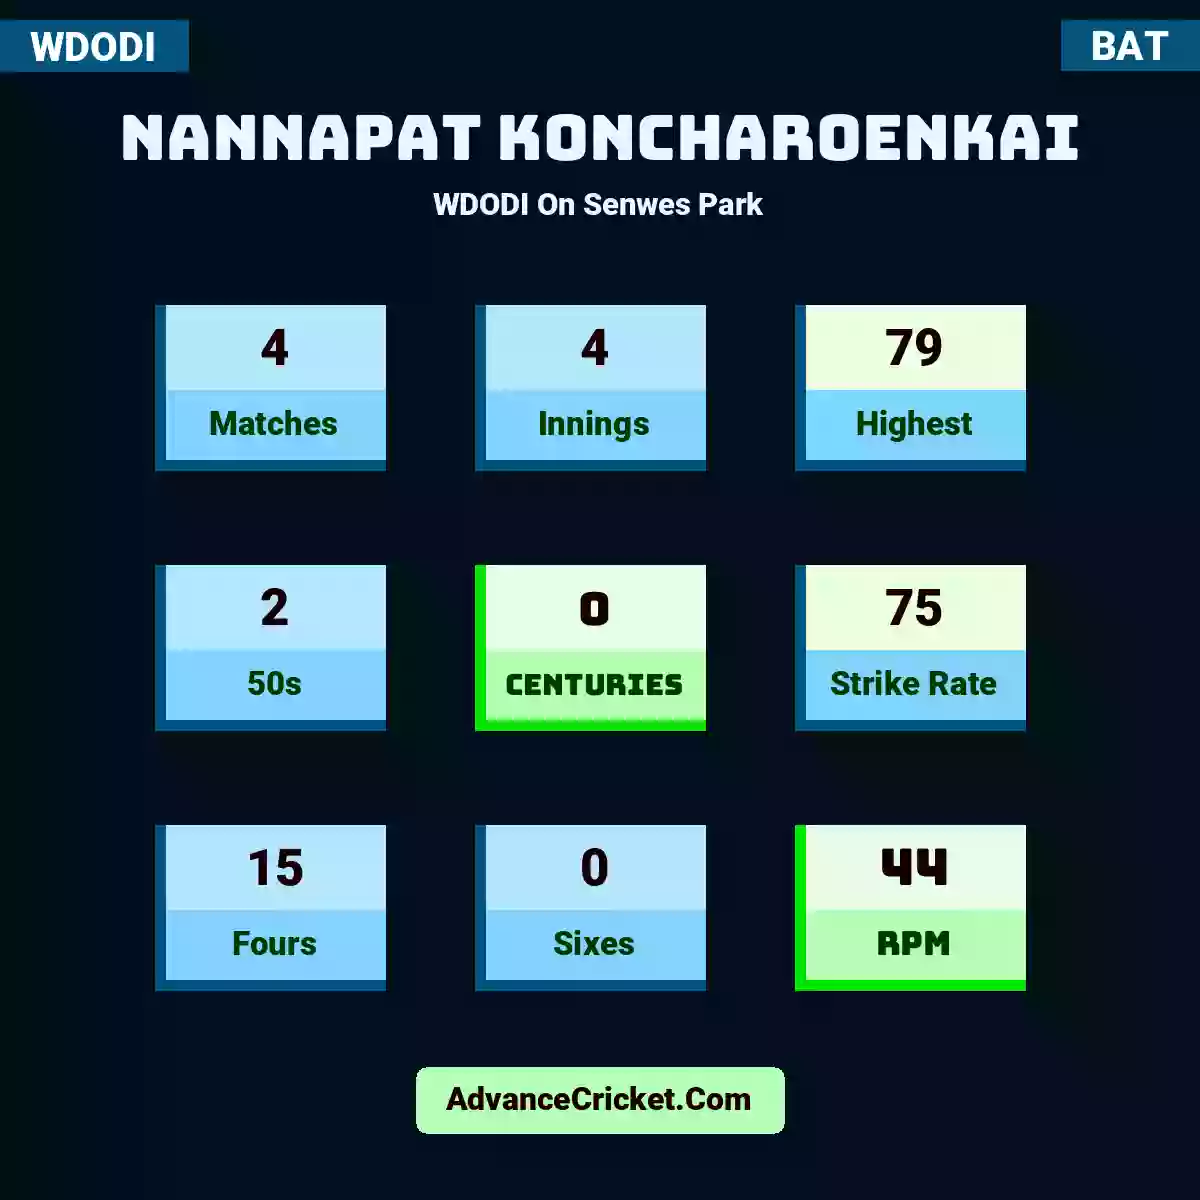 Nannapat Koncharoenkai WDODI  On Senwes Park, Nannapat Koncharoenkai played 4 matches, scored 79 runs as highest, 2 half-centuries, and 0 centuries, with a strike rate of 75. N.Koncharoenkai hit 15 fours and 0 sixes, with an RPM of 44.